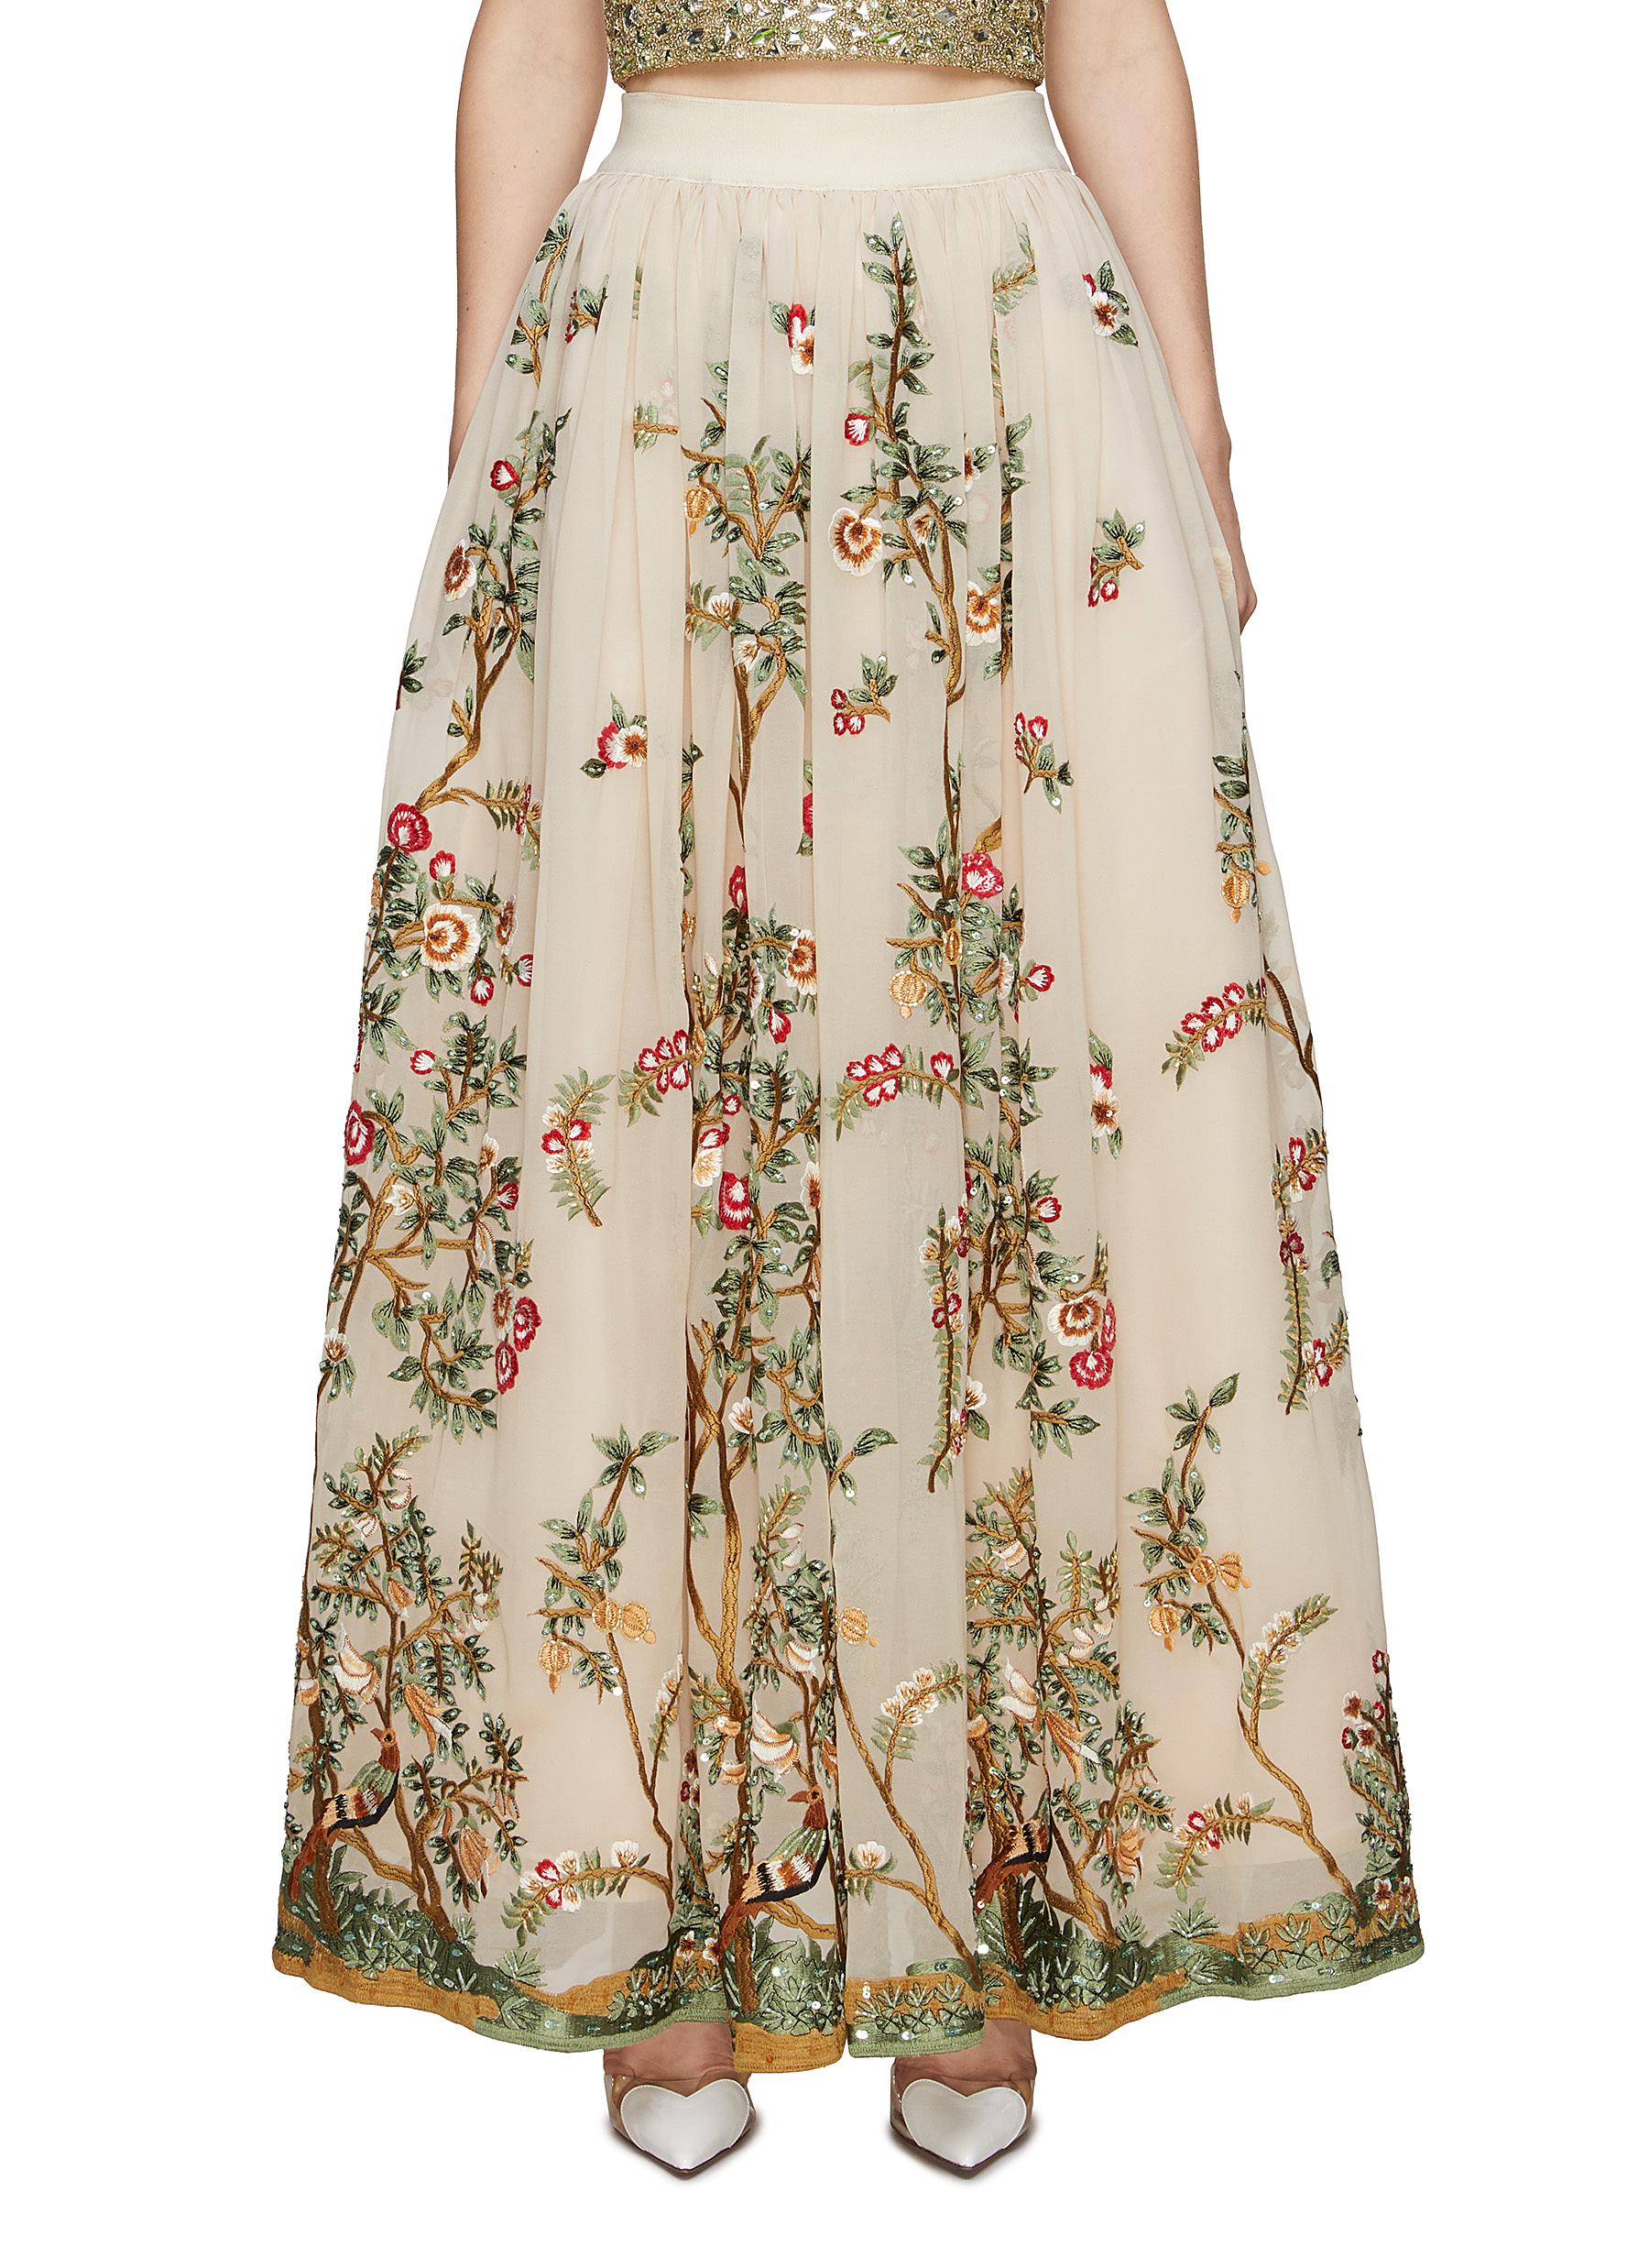 Catrina Floral Embroidery Maxi Skirt